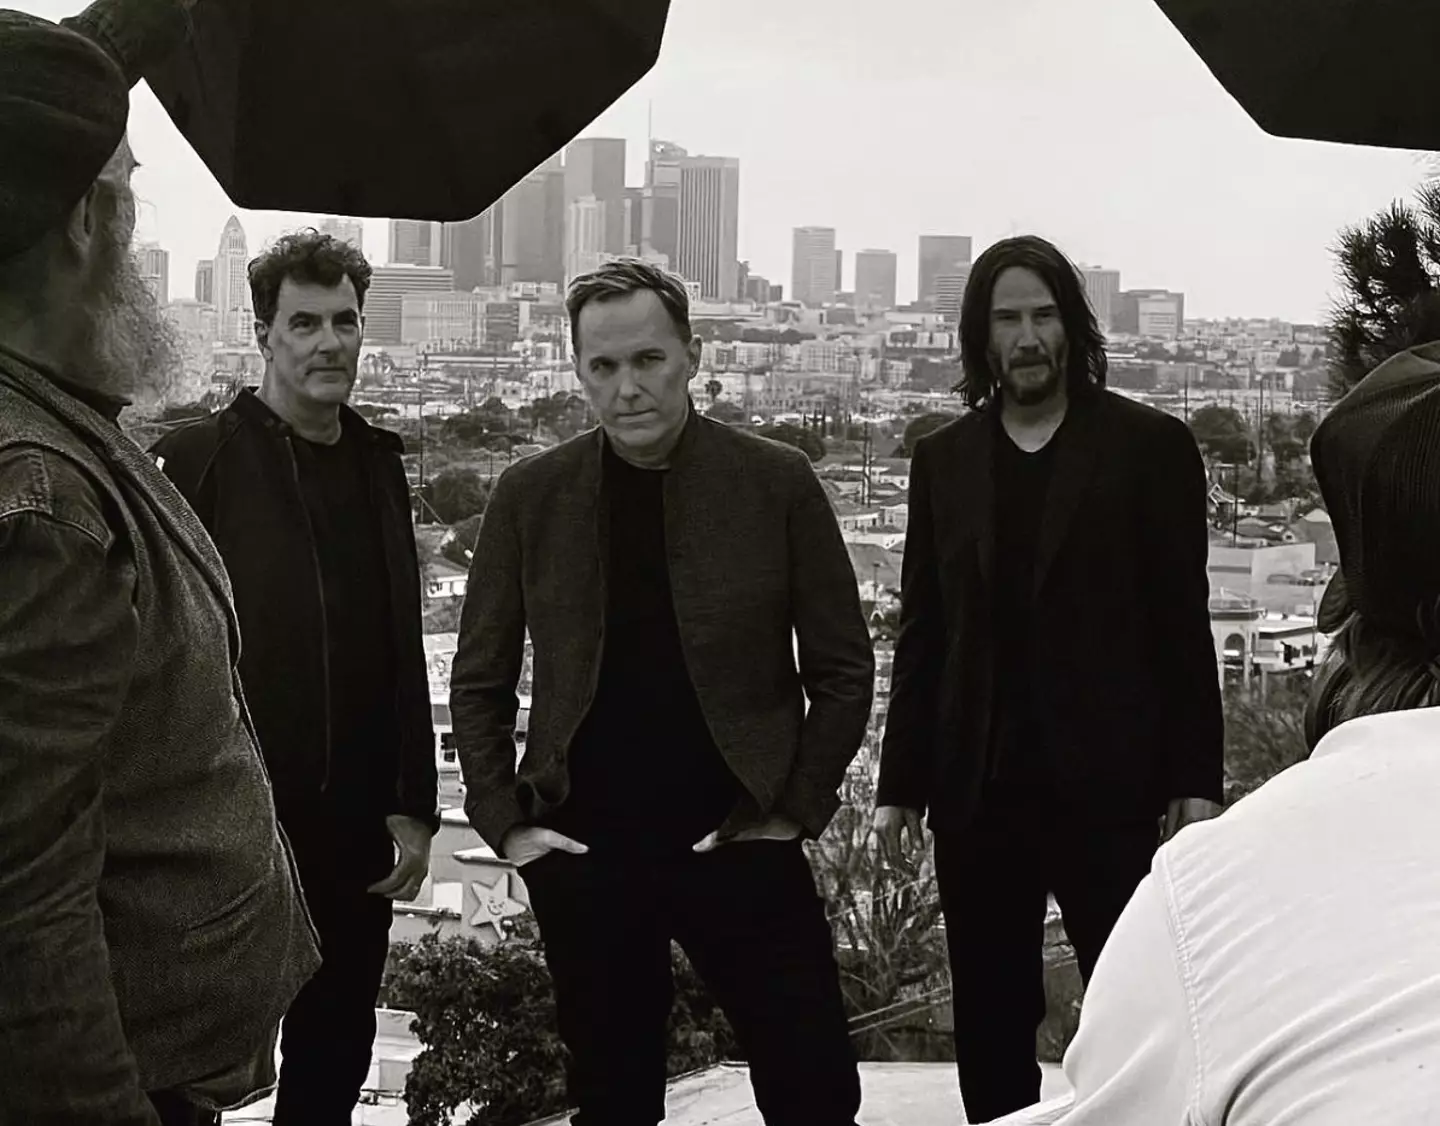 Keanu Reeves has reunited with his old rock band.